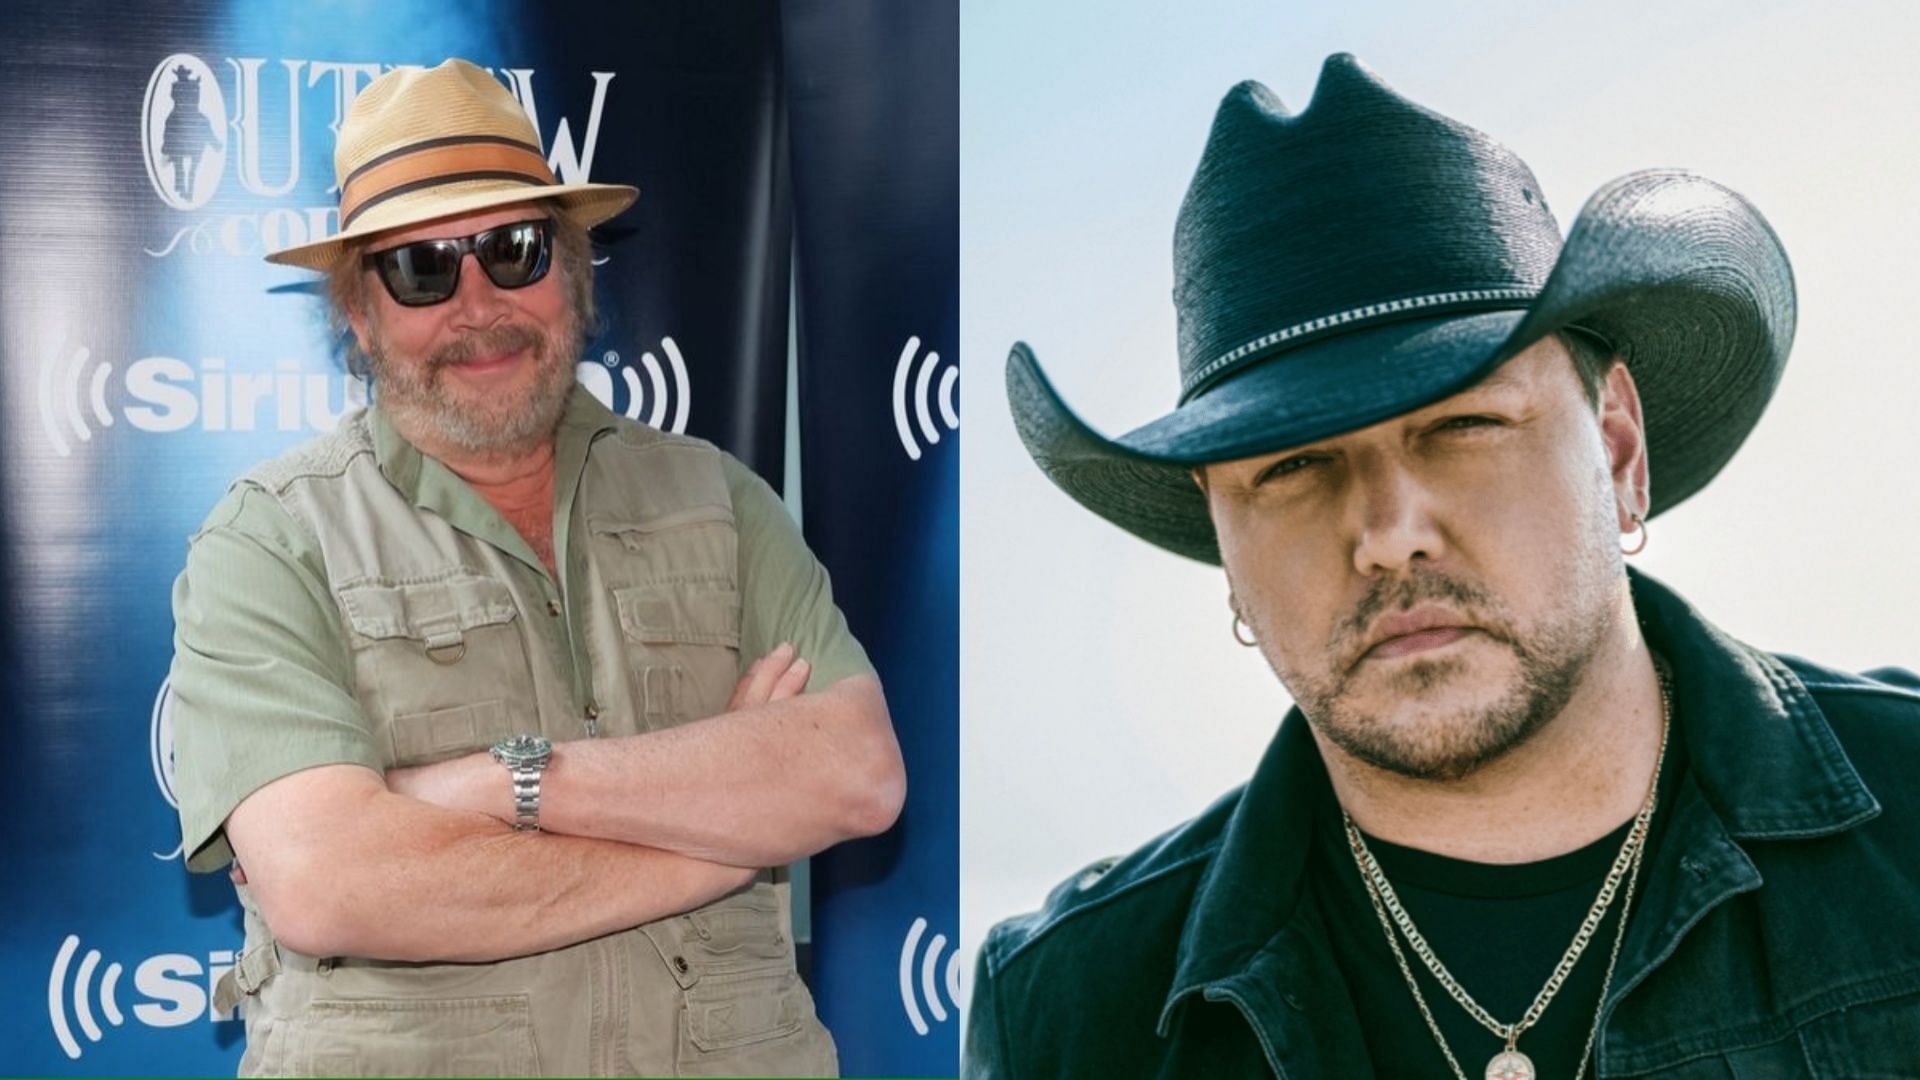 Rumors of singer Hank William Jr resigning from the CMT in support of Jason Aldean debunked (Image via Getty Images and Broken Bow Records)